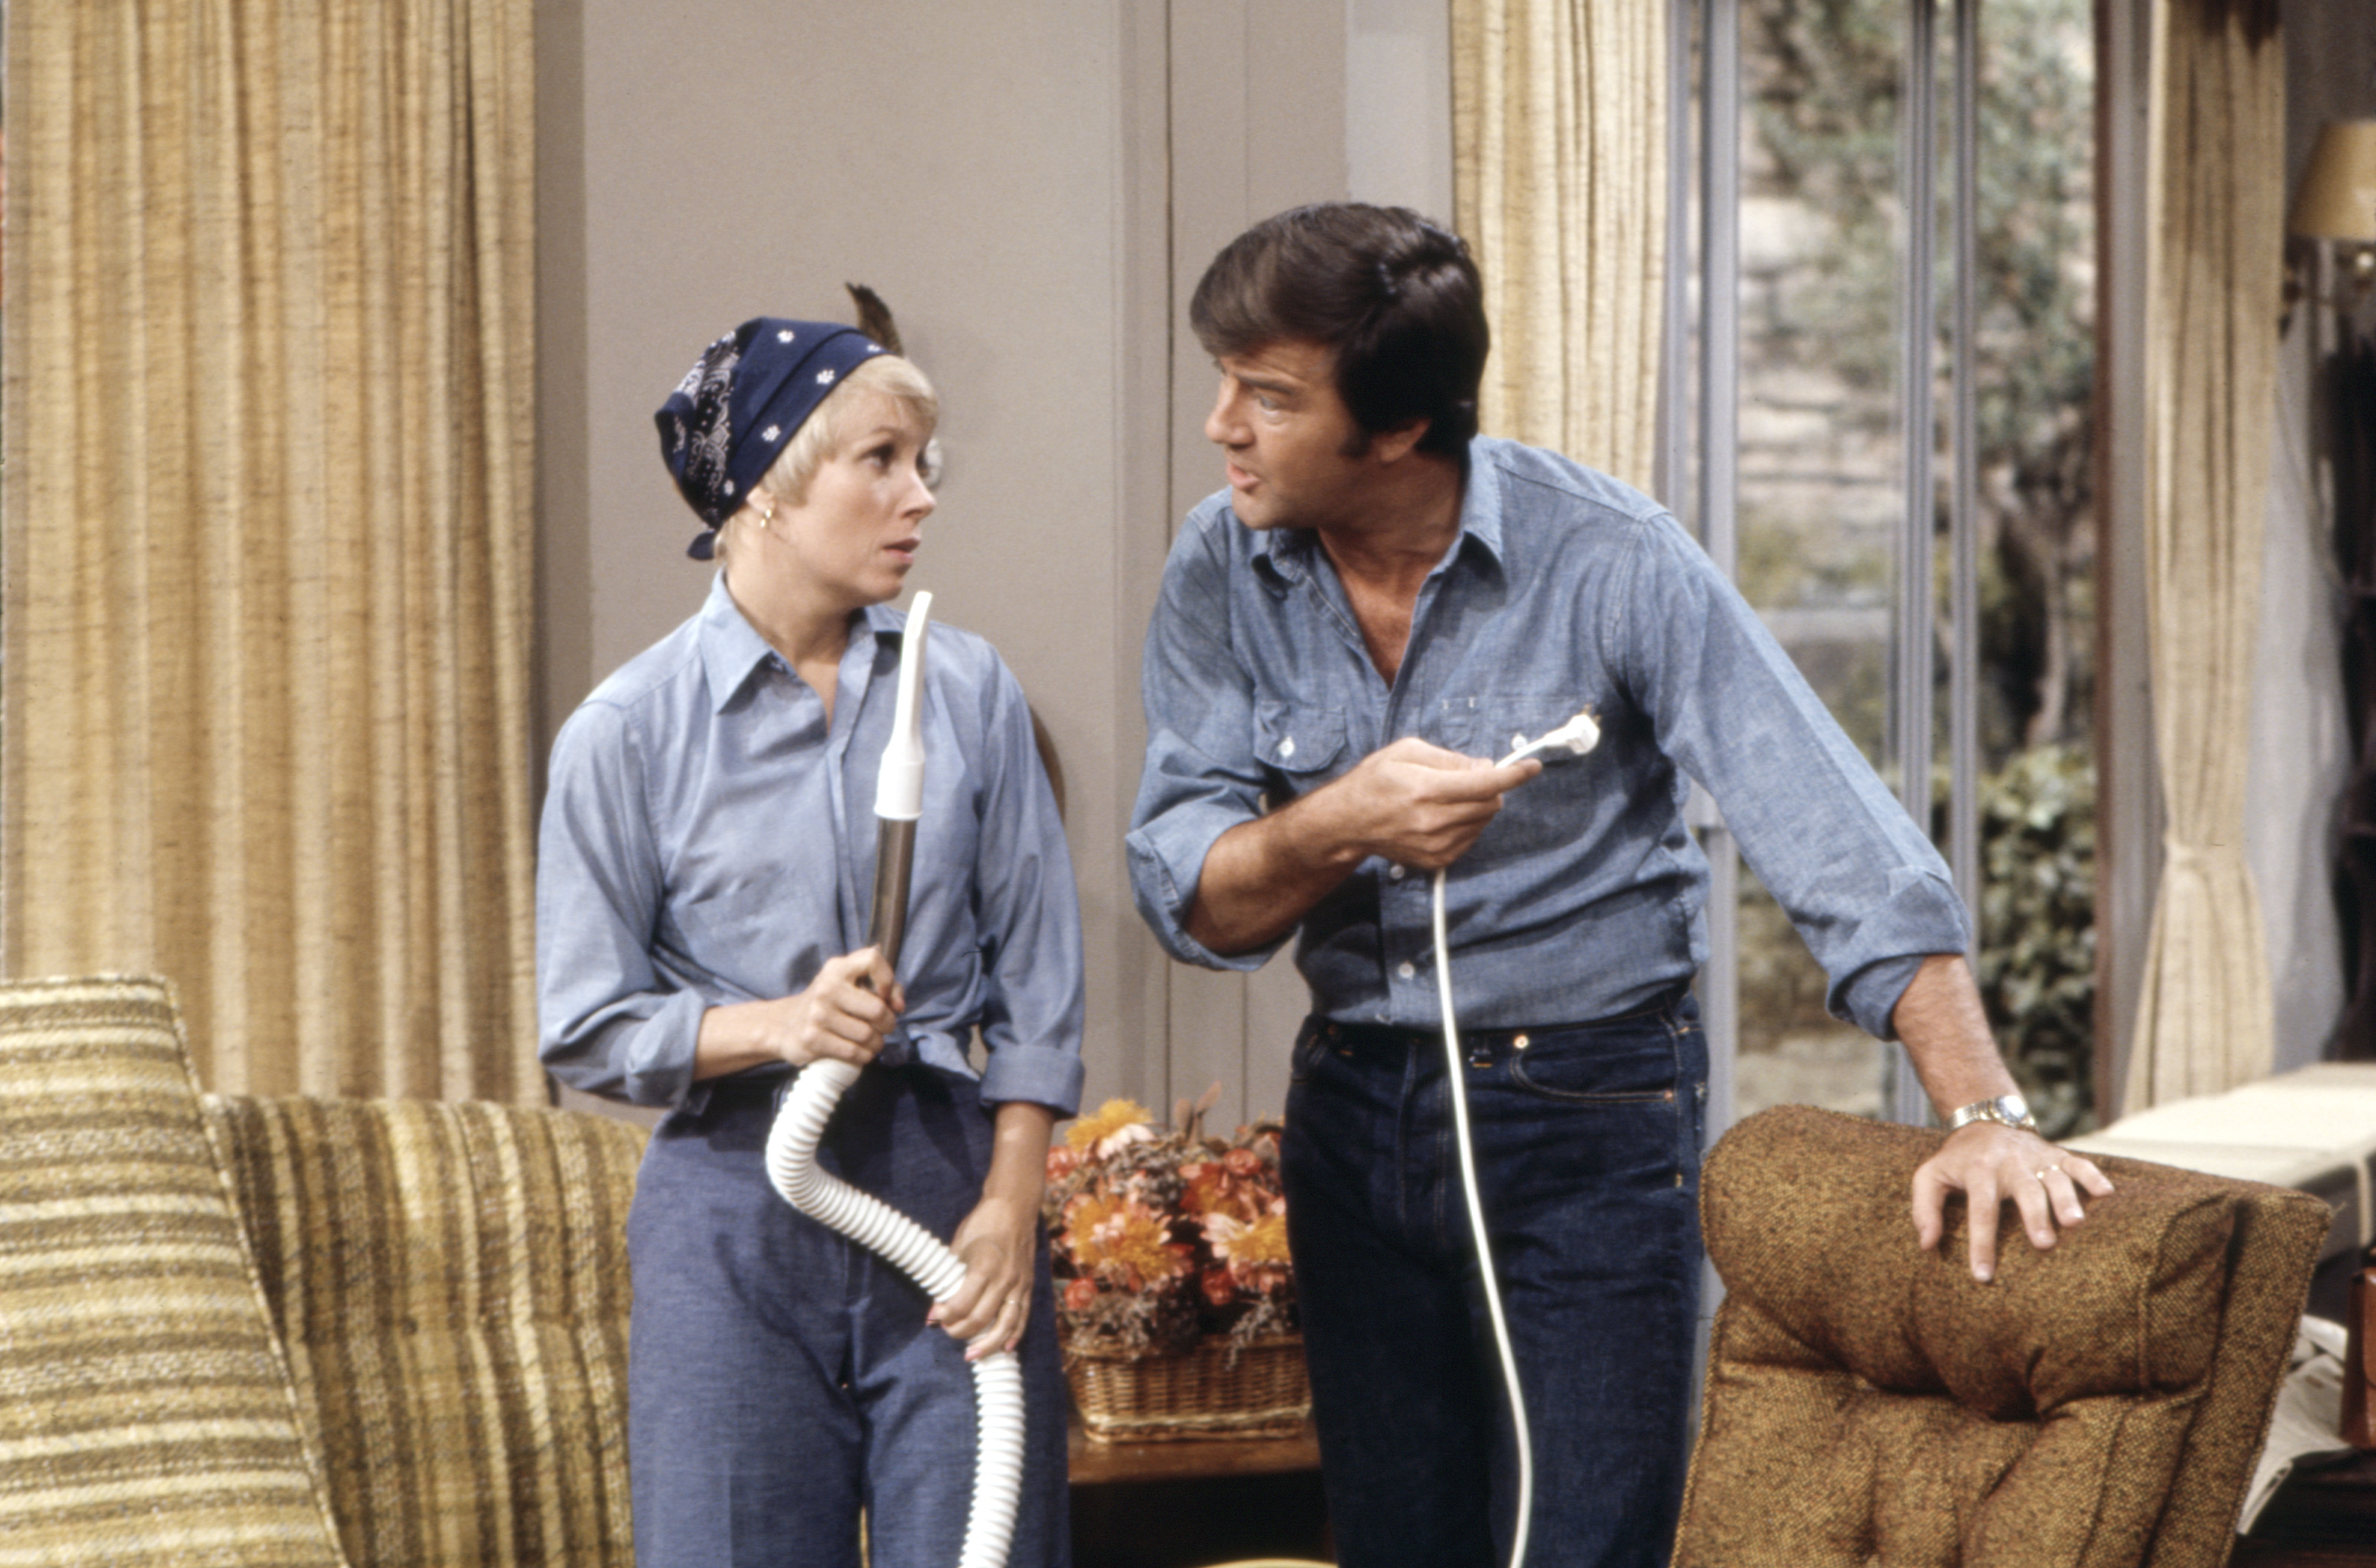 Joyce Bulifant and Ron Masak in an episode of "Love Thy Neighbor" circa 1973 | Source: Getty Images